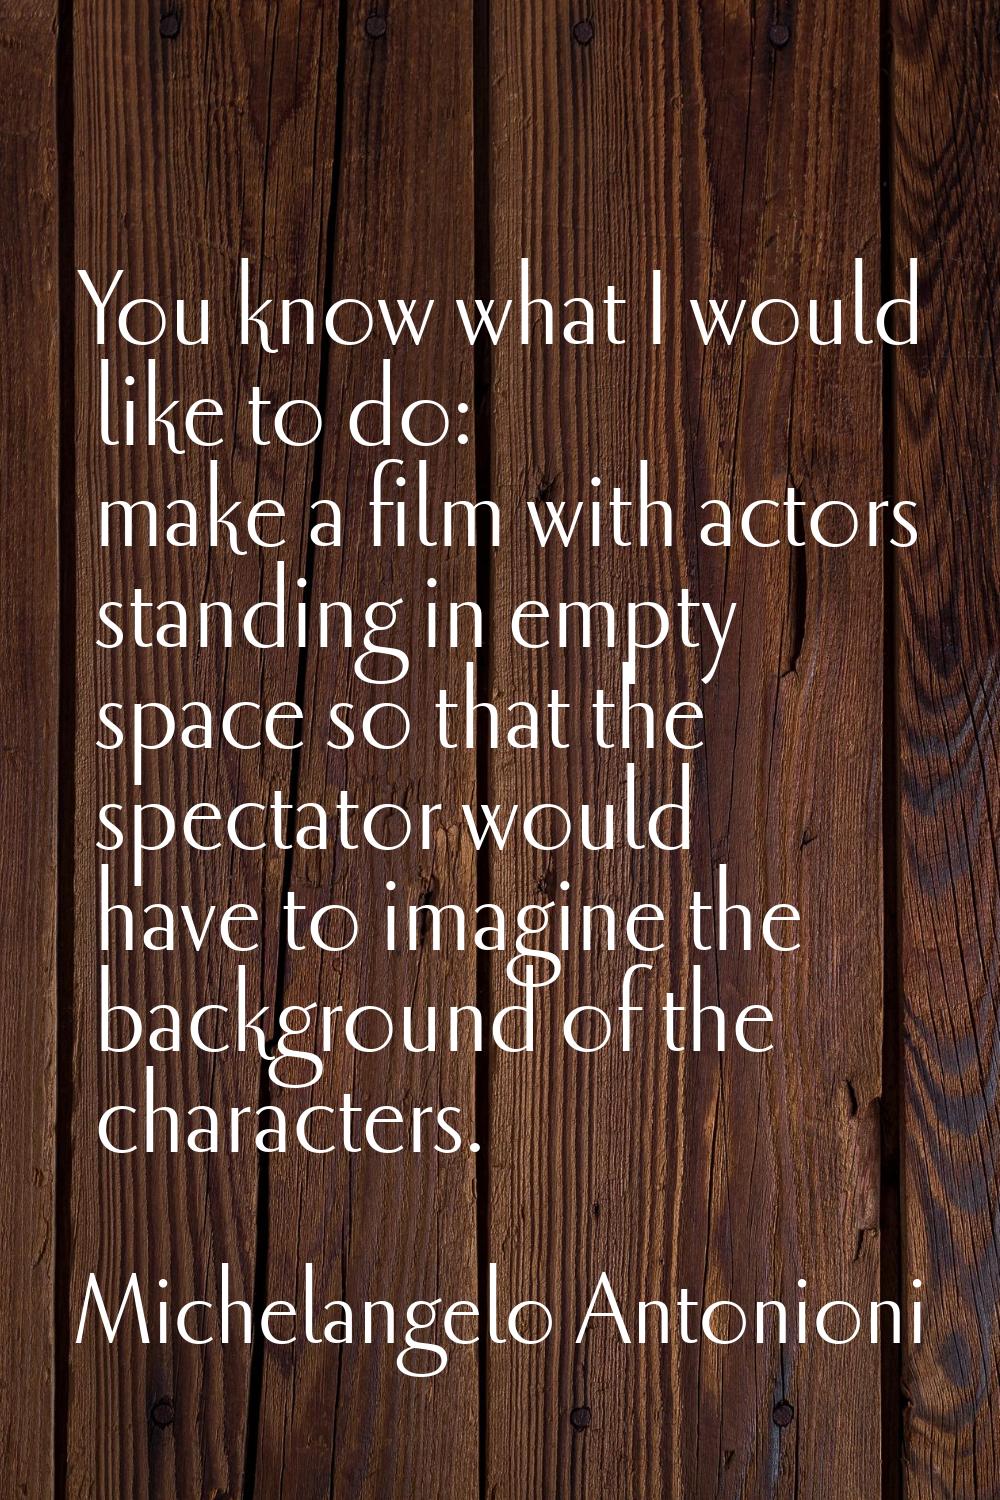 You know what I would like to do: make a film with actors standing in empty space so that the spect